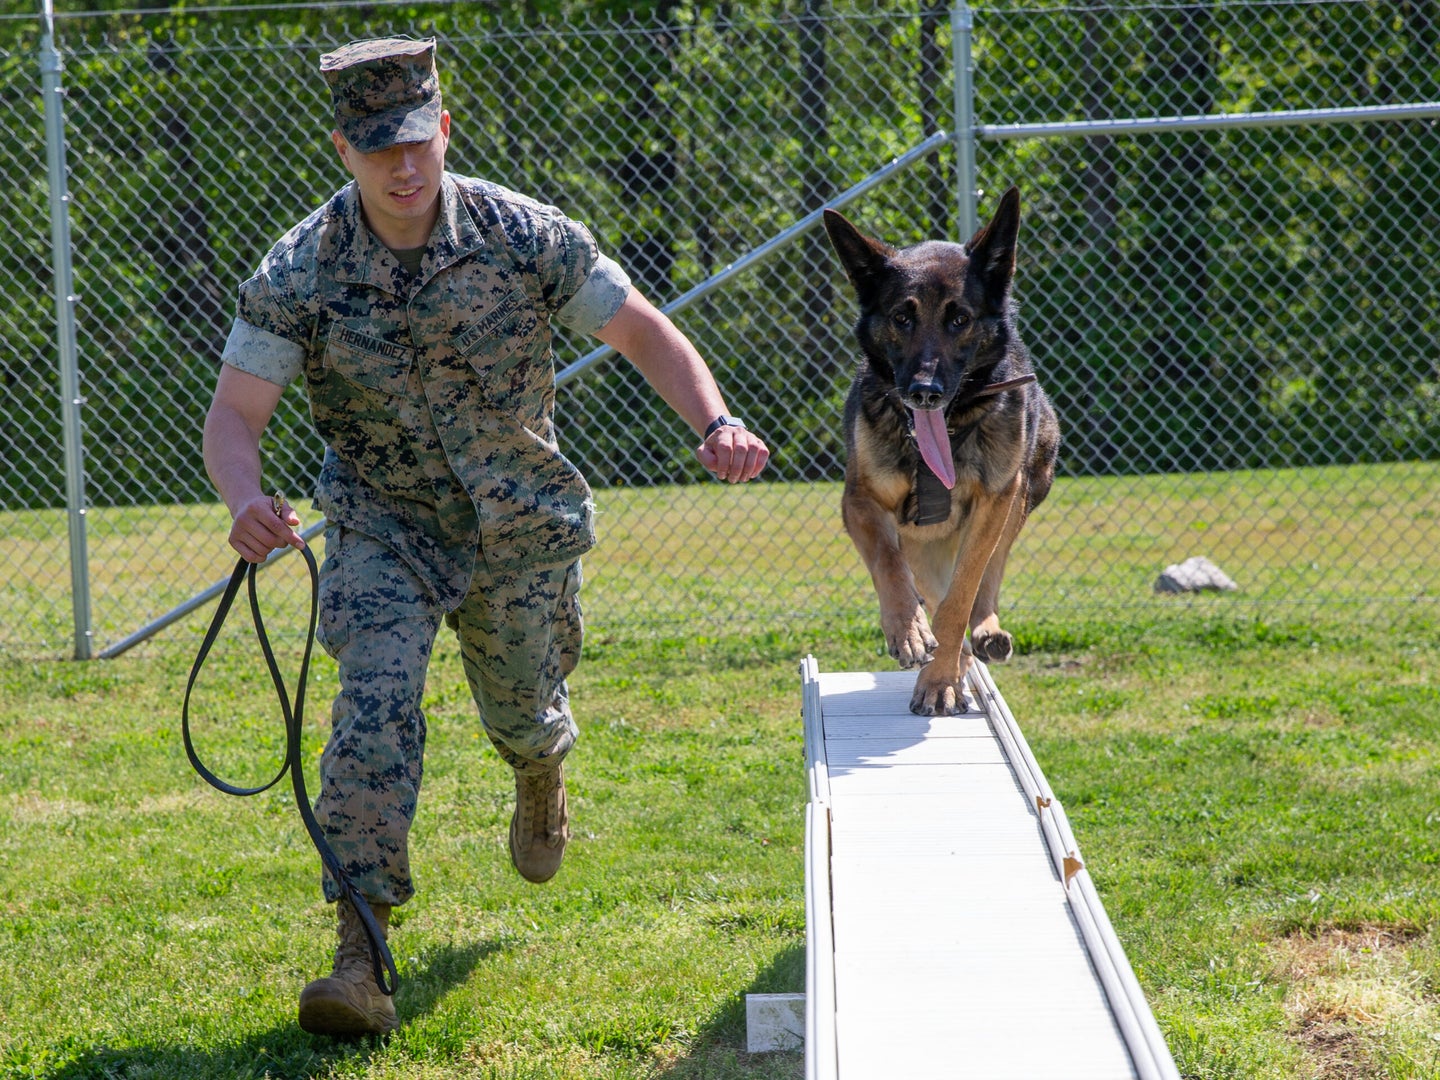 Marine working dog handler working with his canine on an obstacle course.